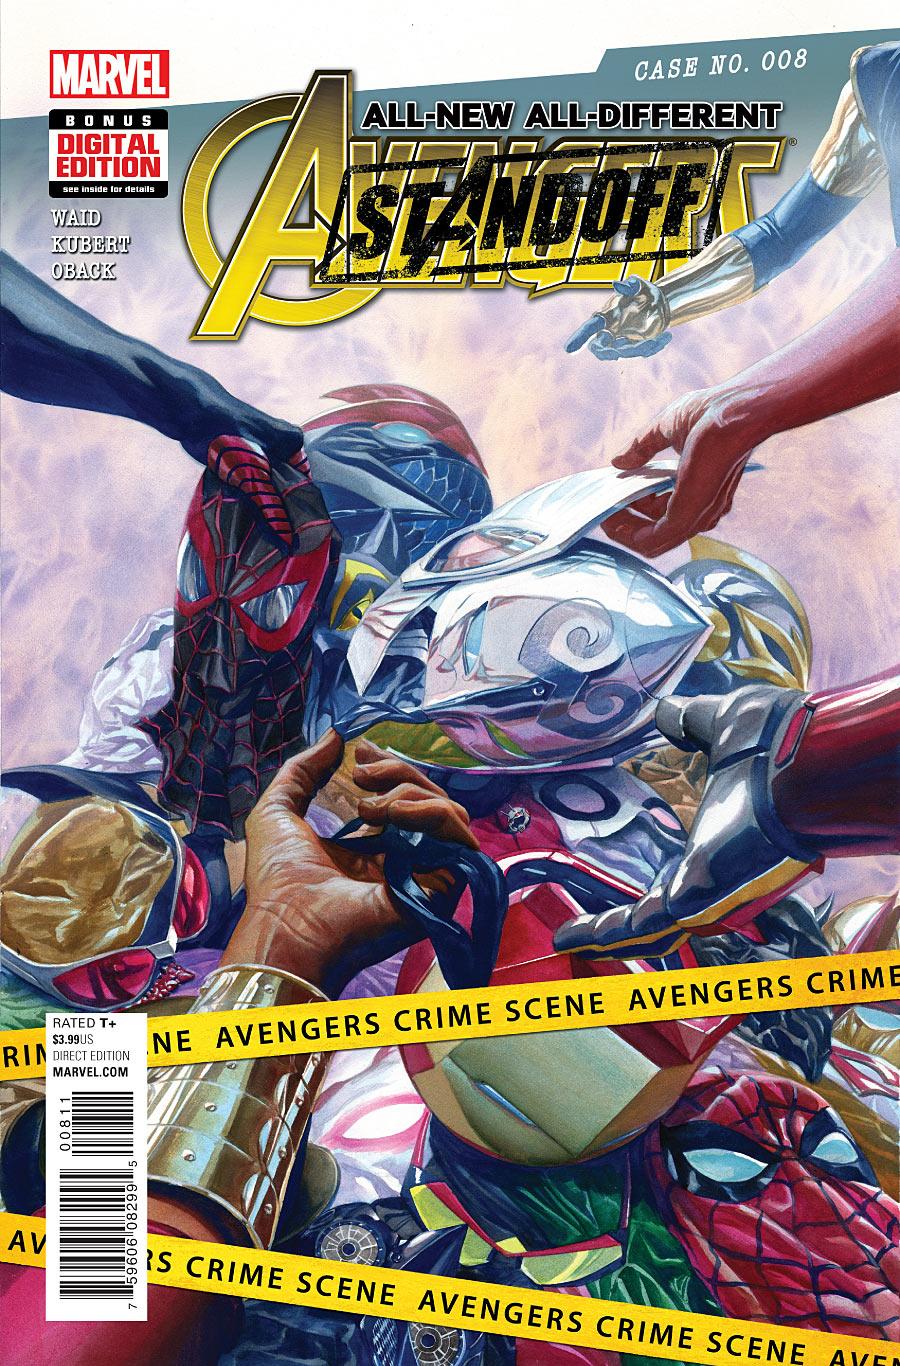 All-New, All-Different Avengers Vol. 1 #8